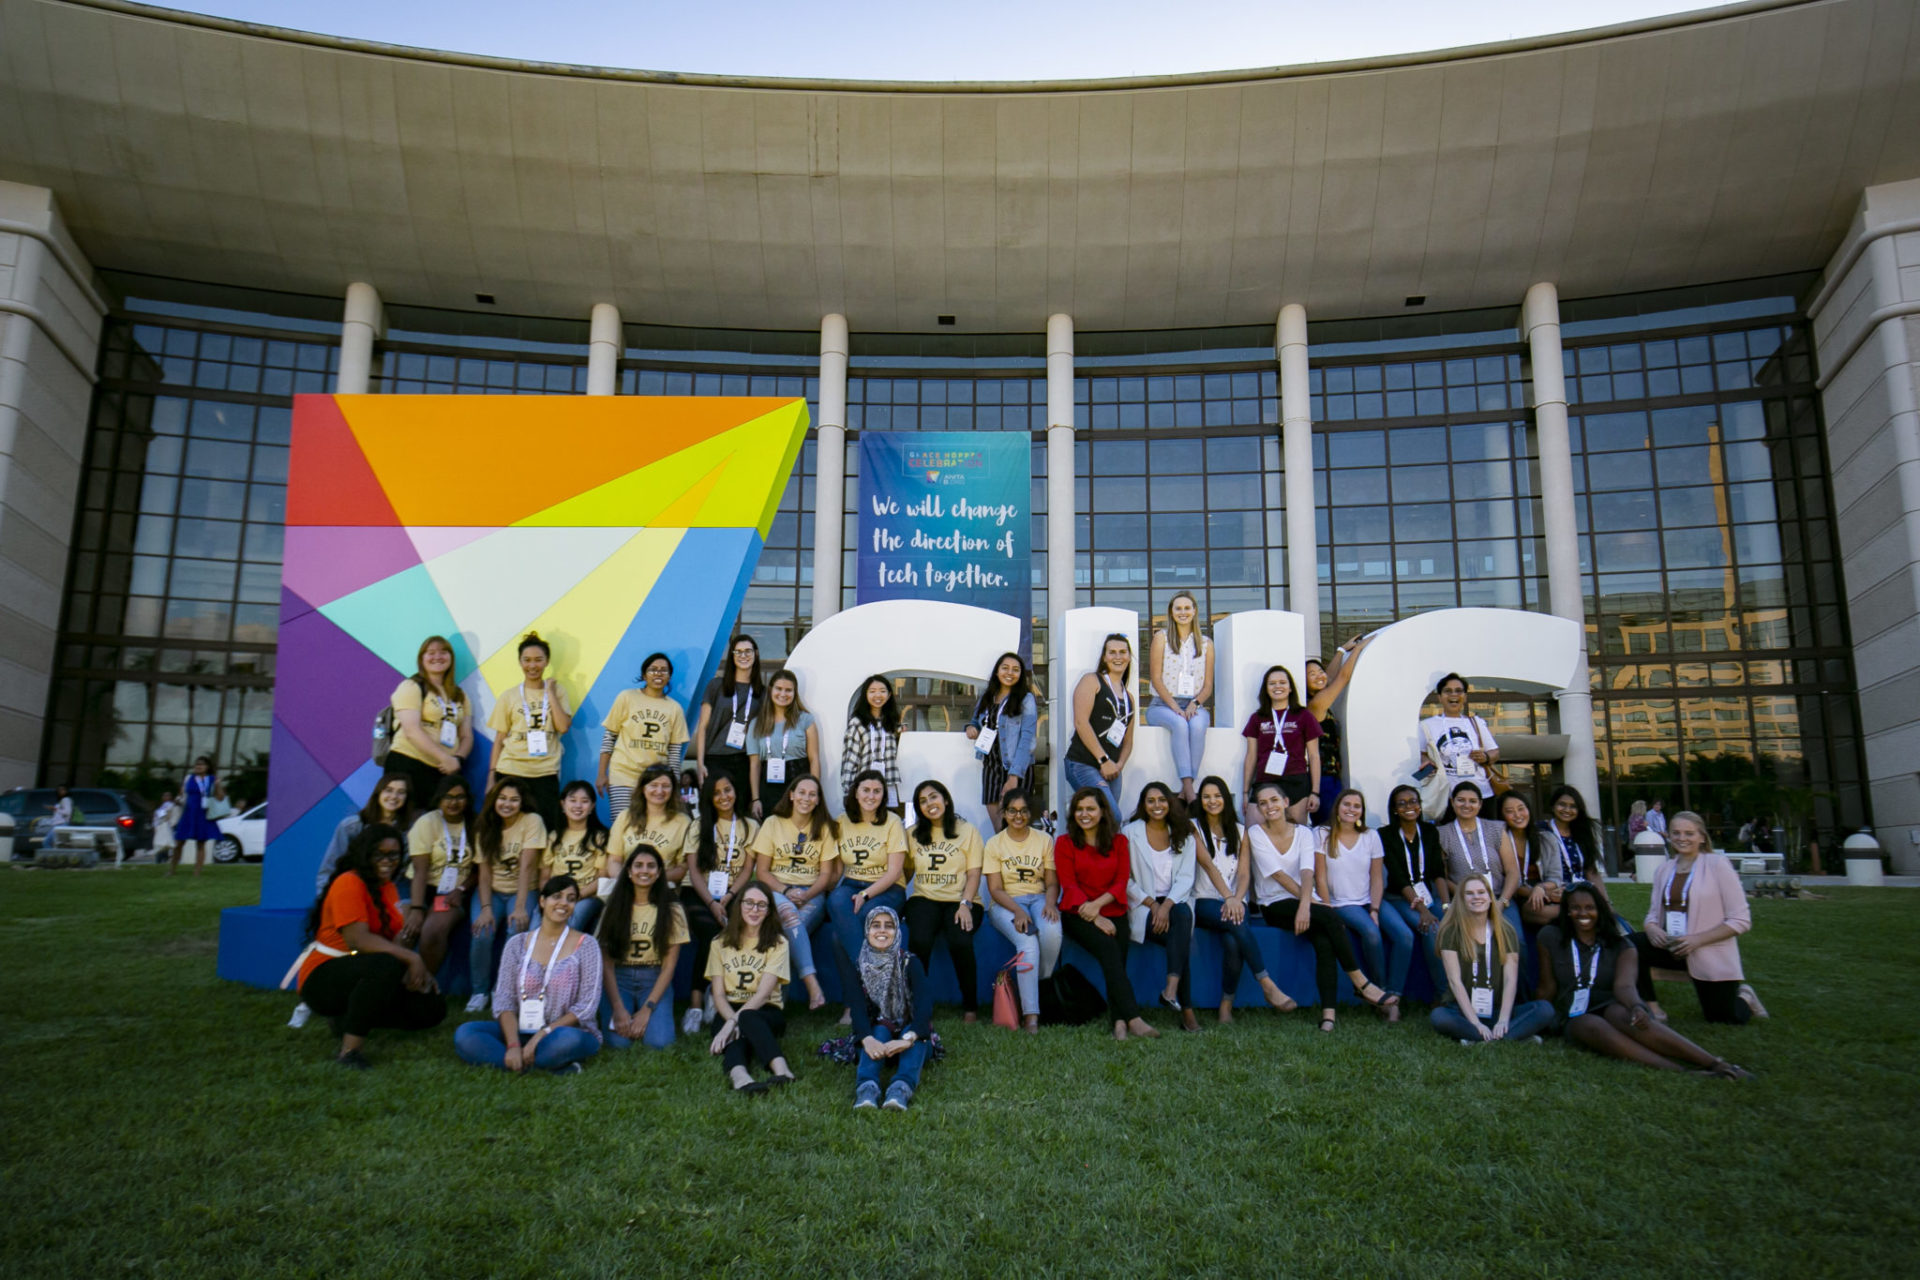 #GHC19 Daily Download: Wednesday, October 2